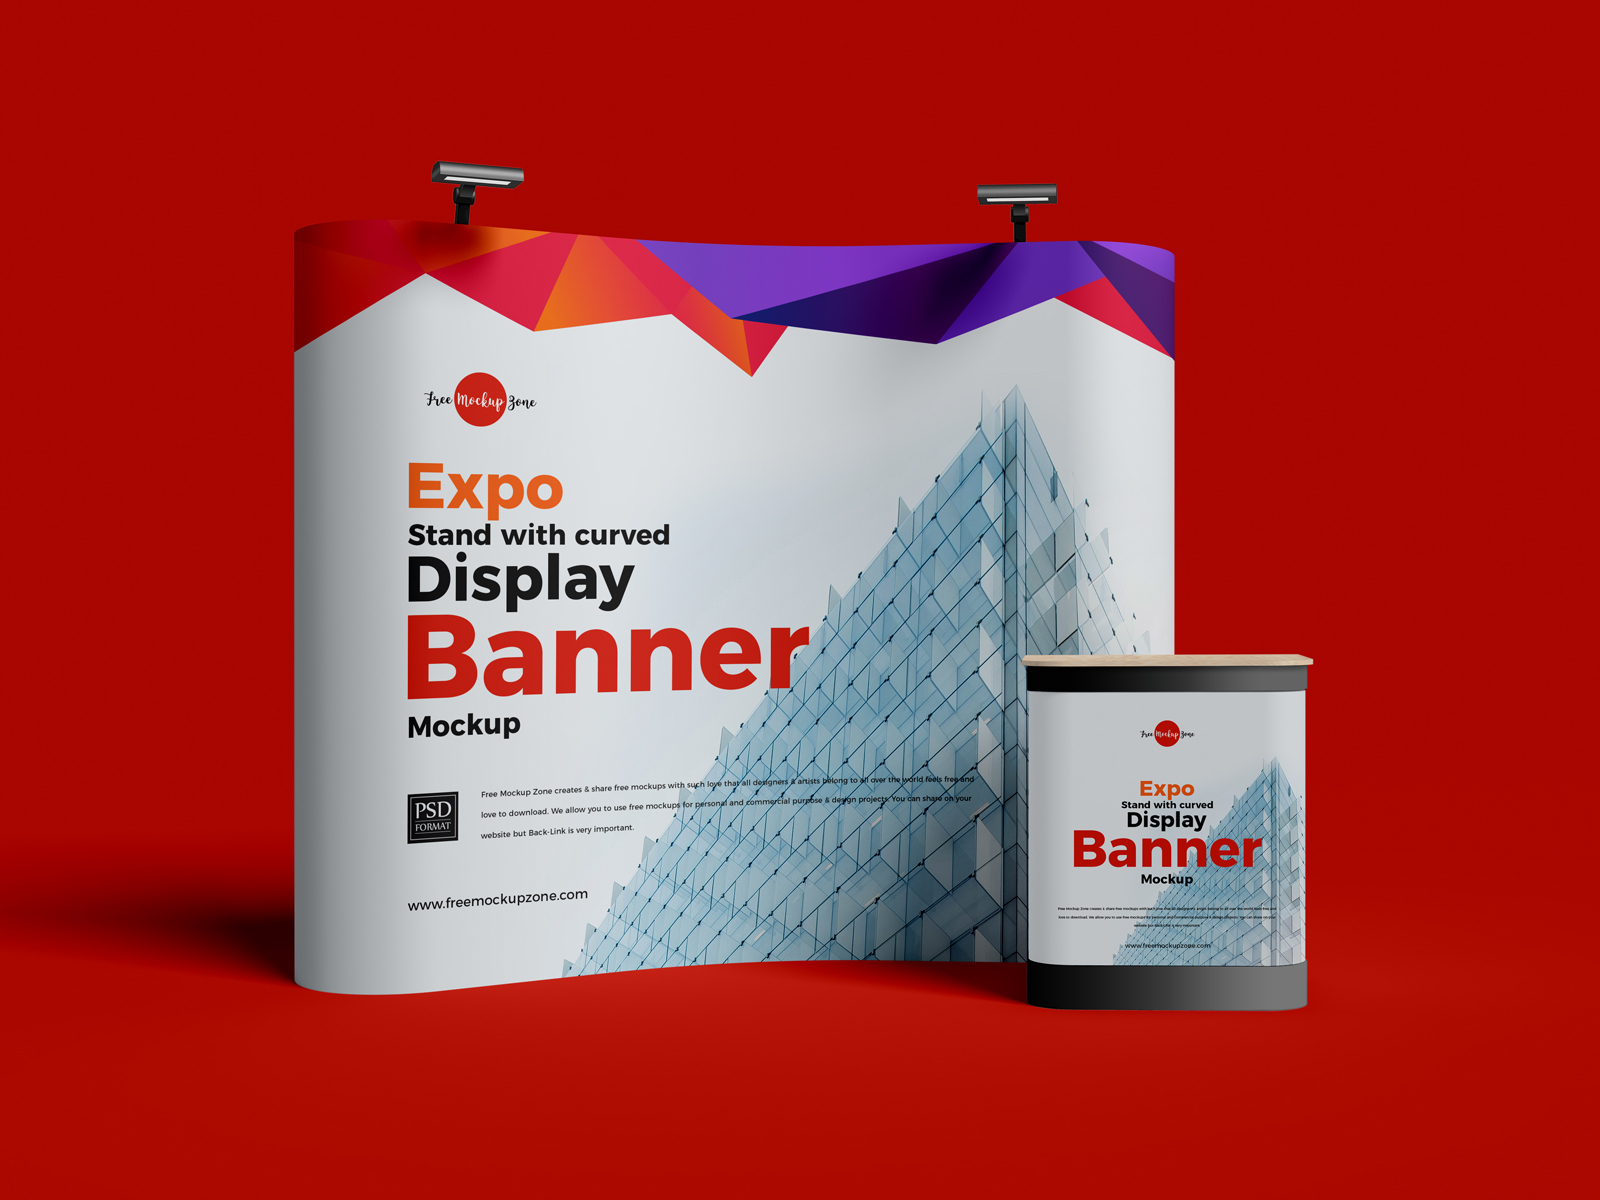 Download Free Expo Curved Display Banner Mockup By Free Mockup Zone On Dribbble